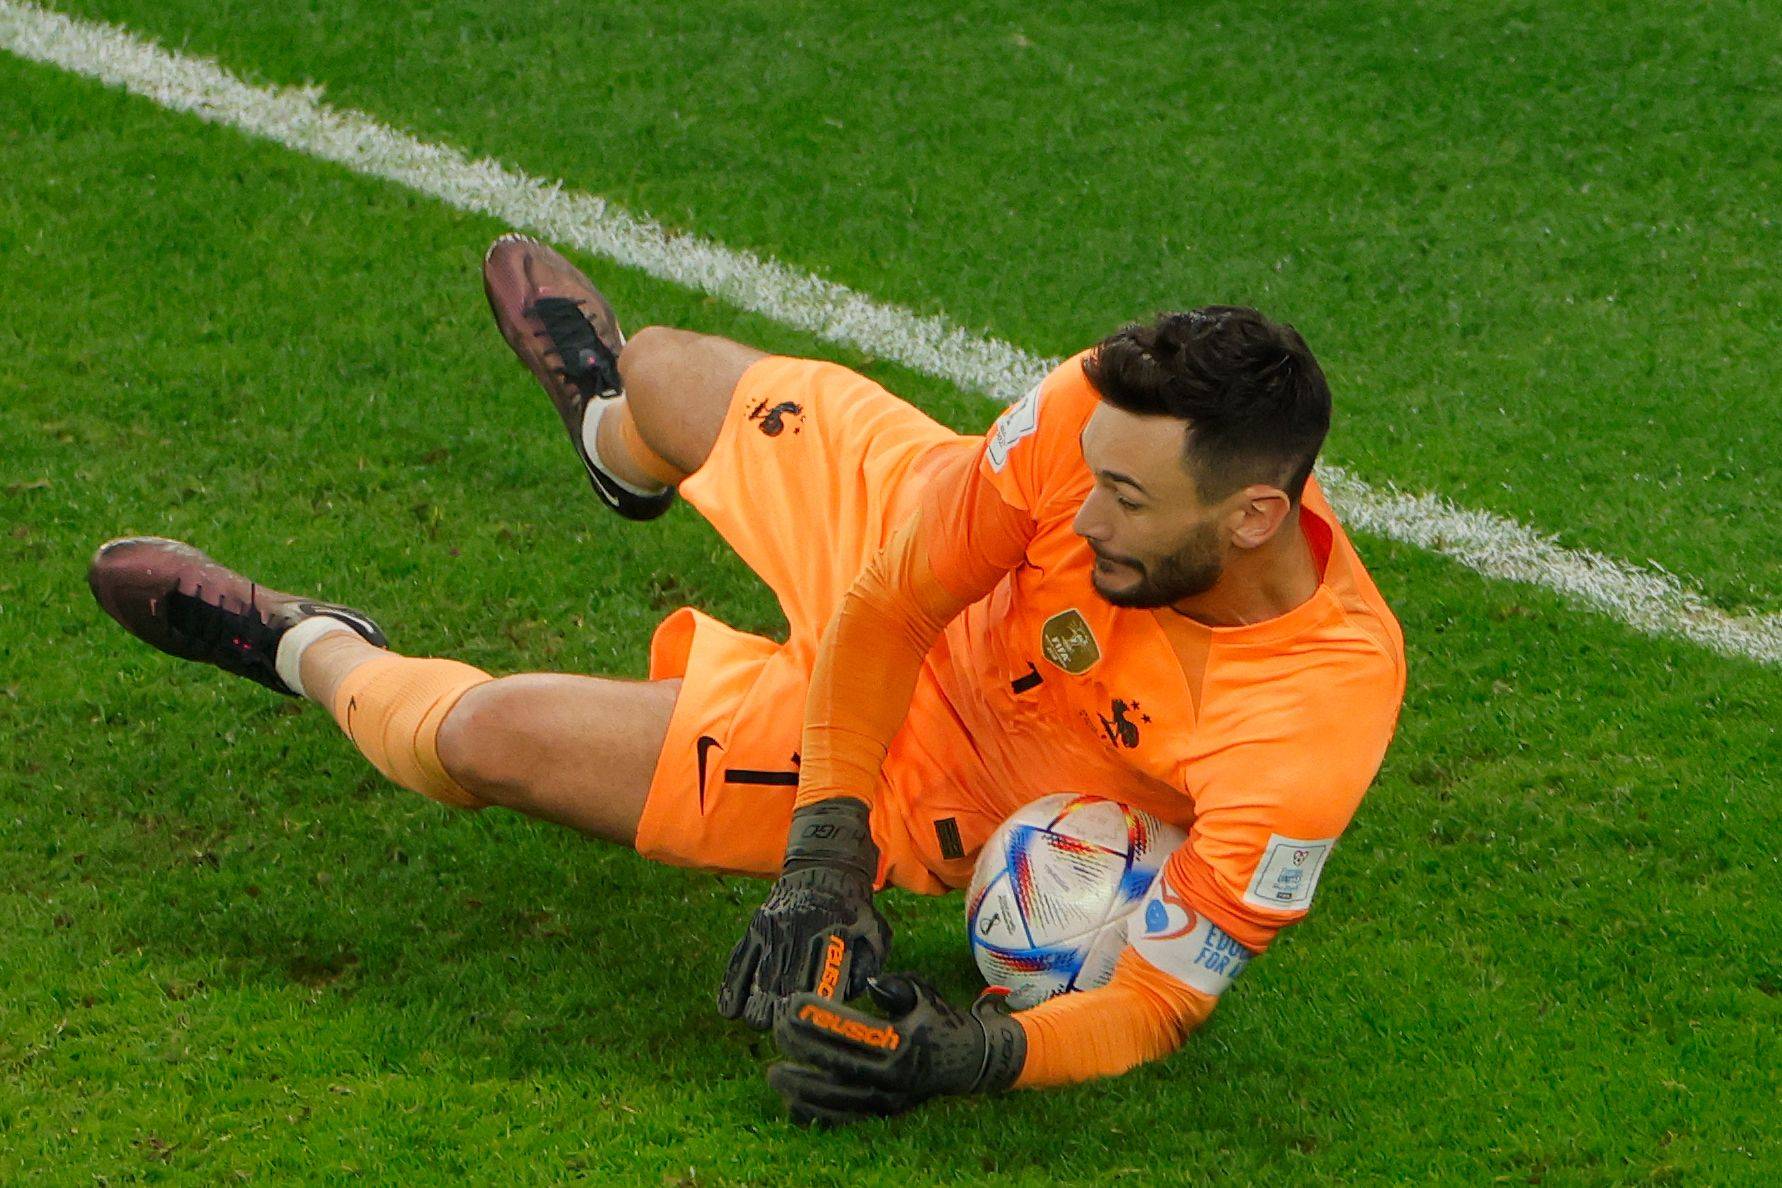 France goalkeeper Hugo Lloris: World Cup loss will help youngsters, Football